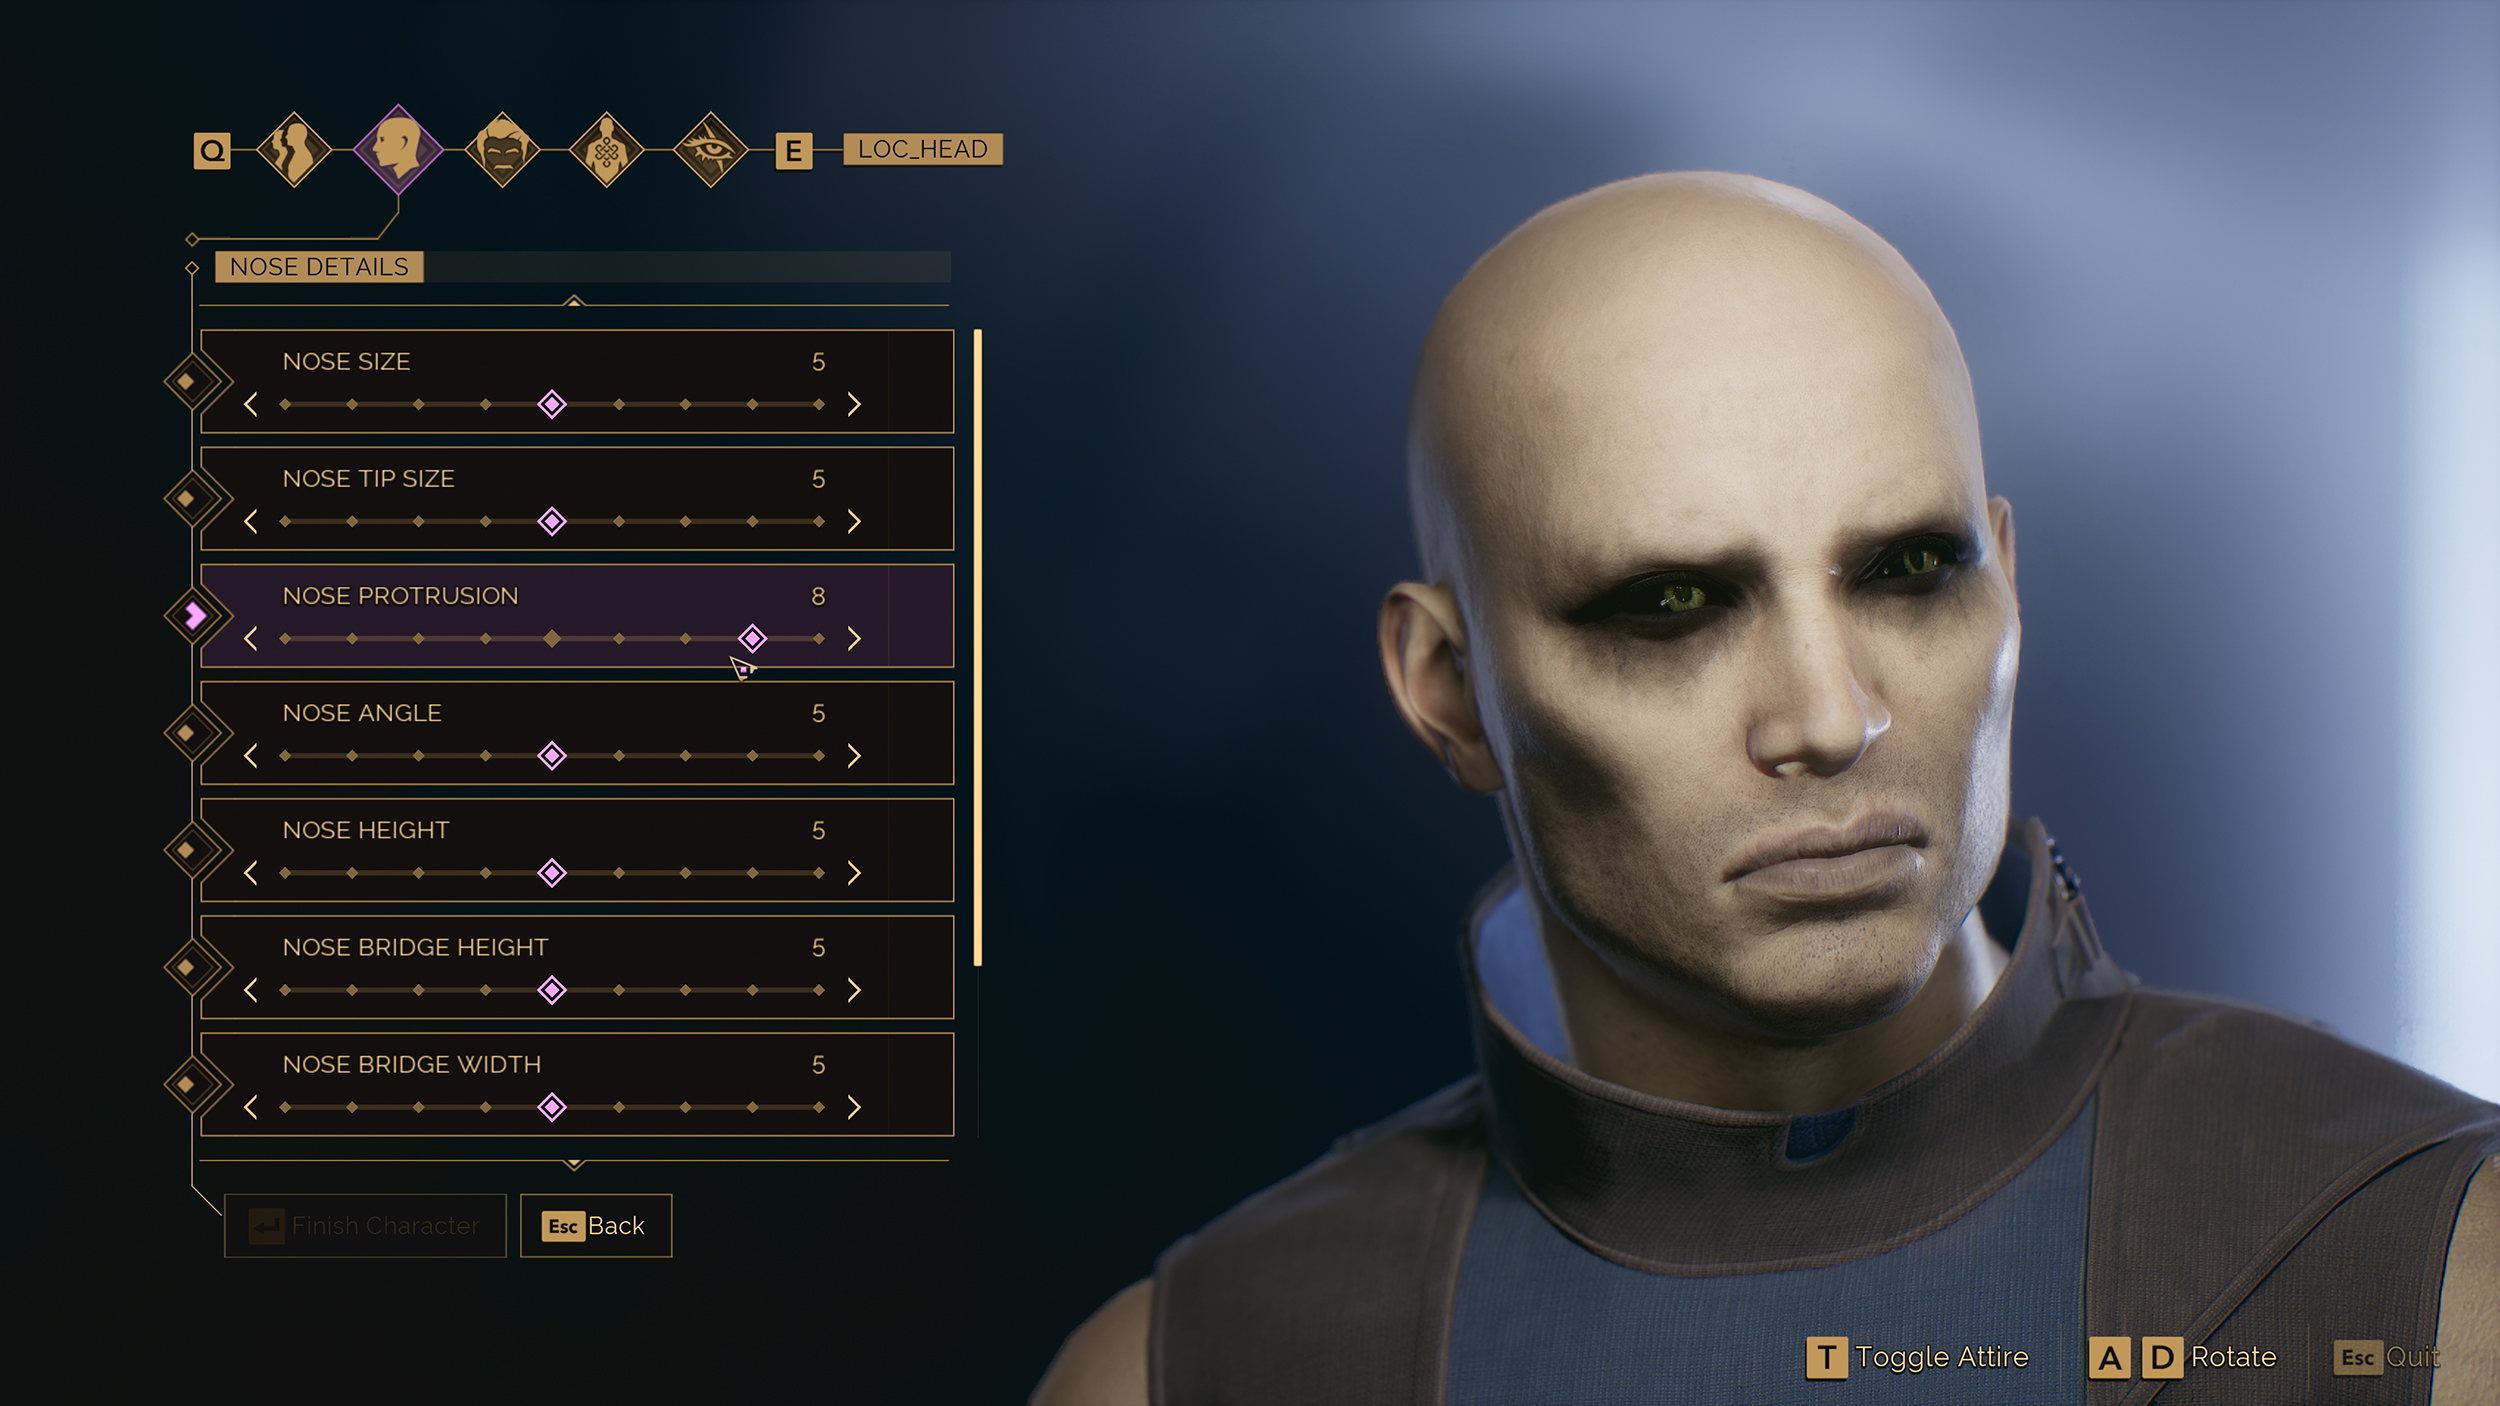 Sci-fi character from Dune